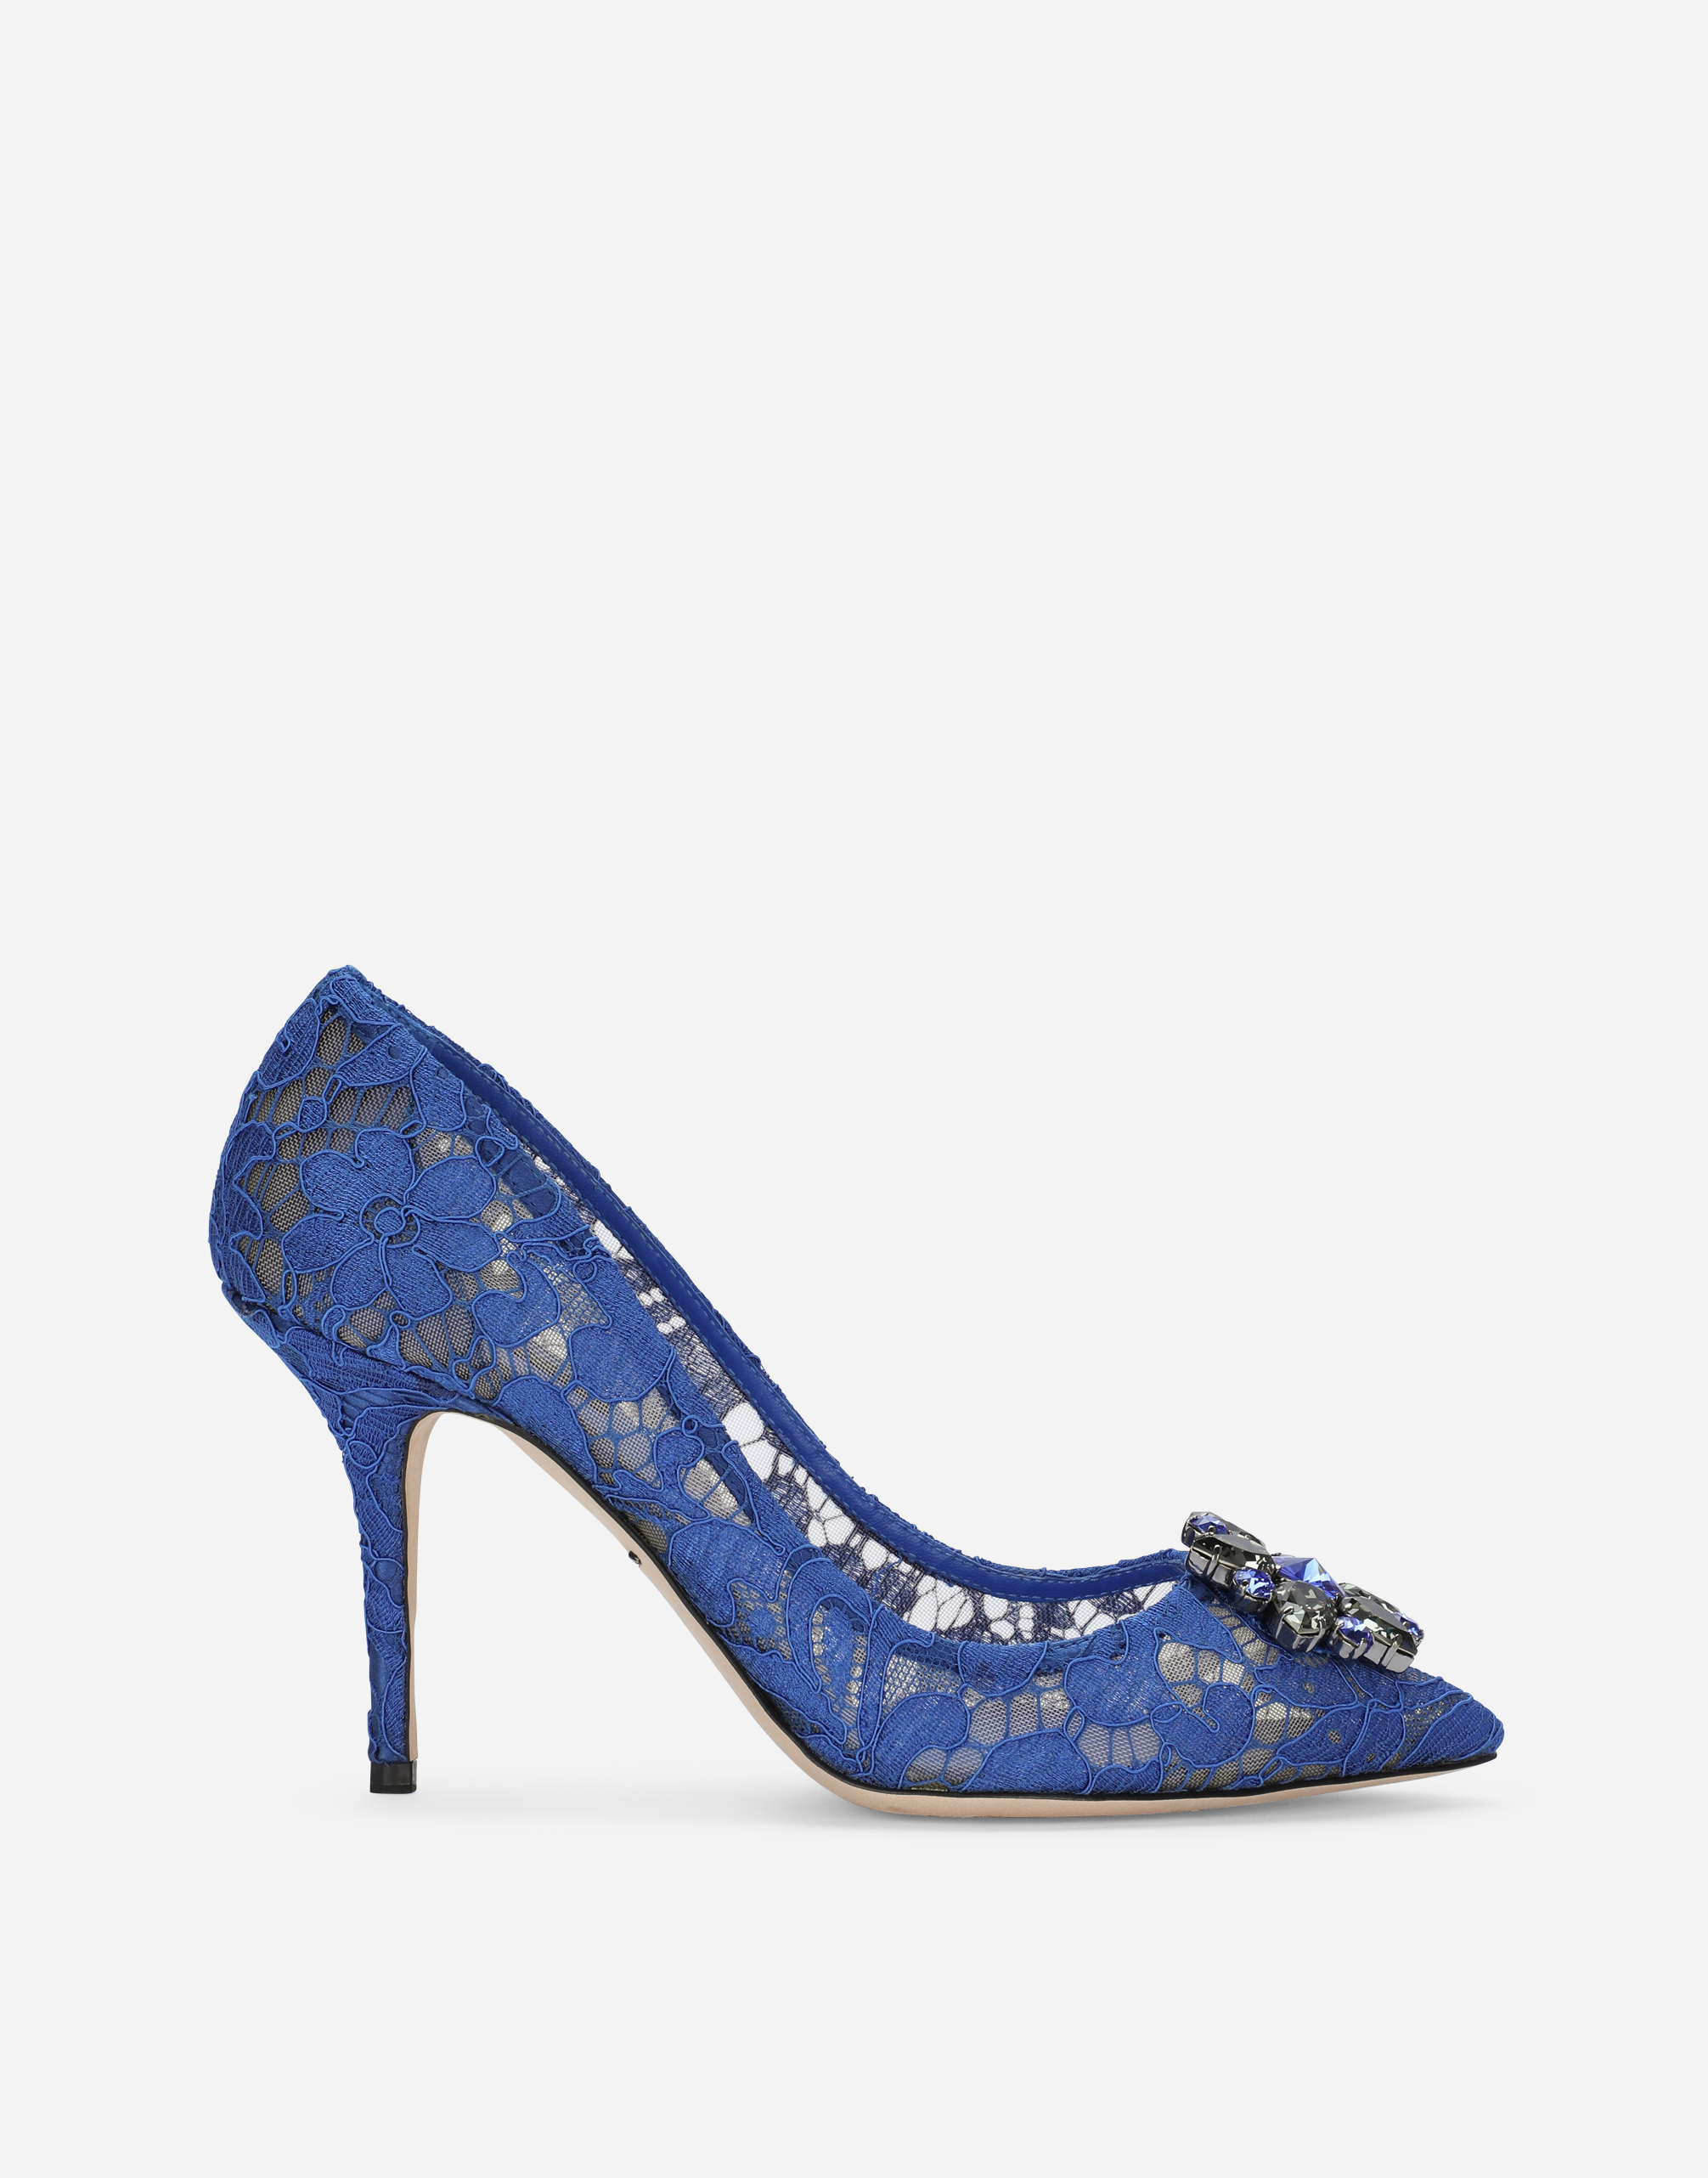 Lace rainbow pumps with brooch detailing in Blue